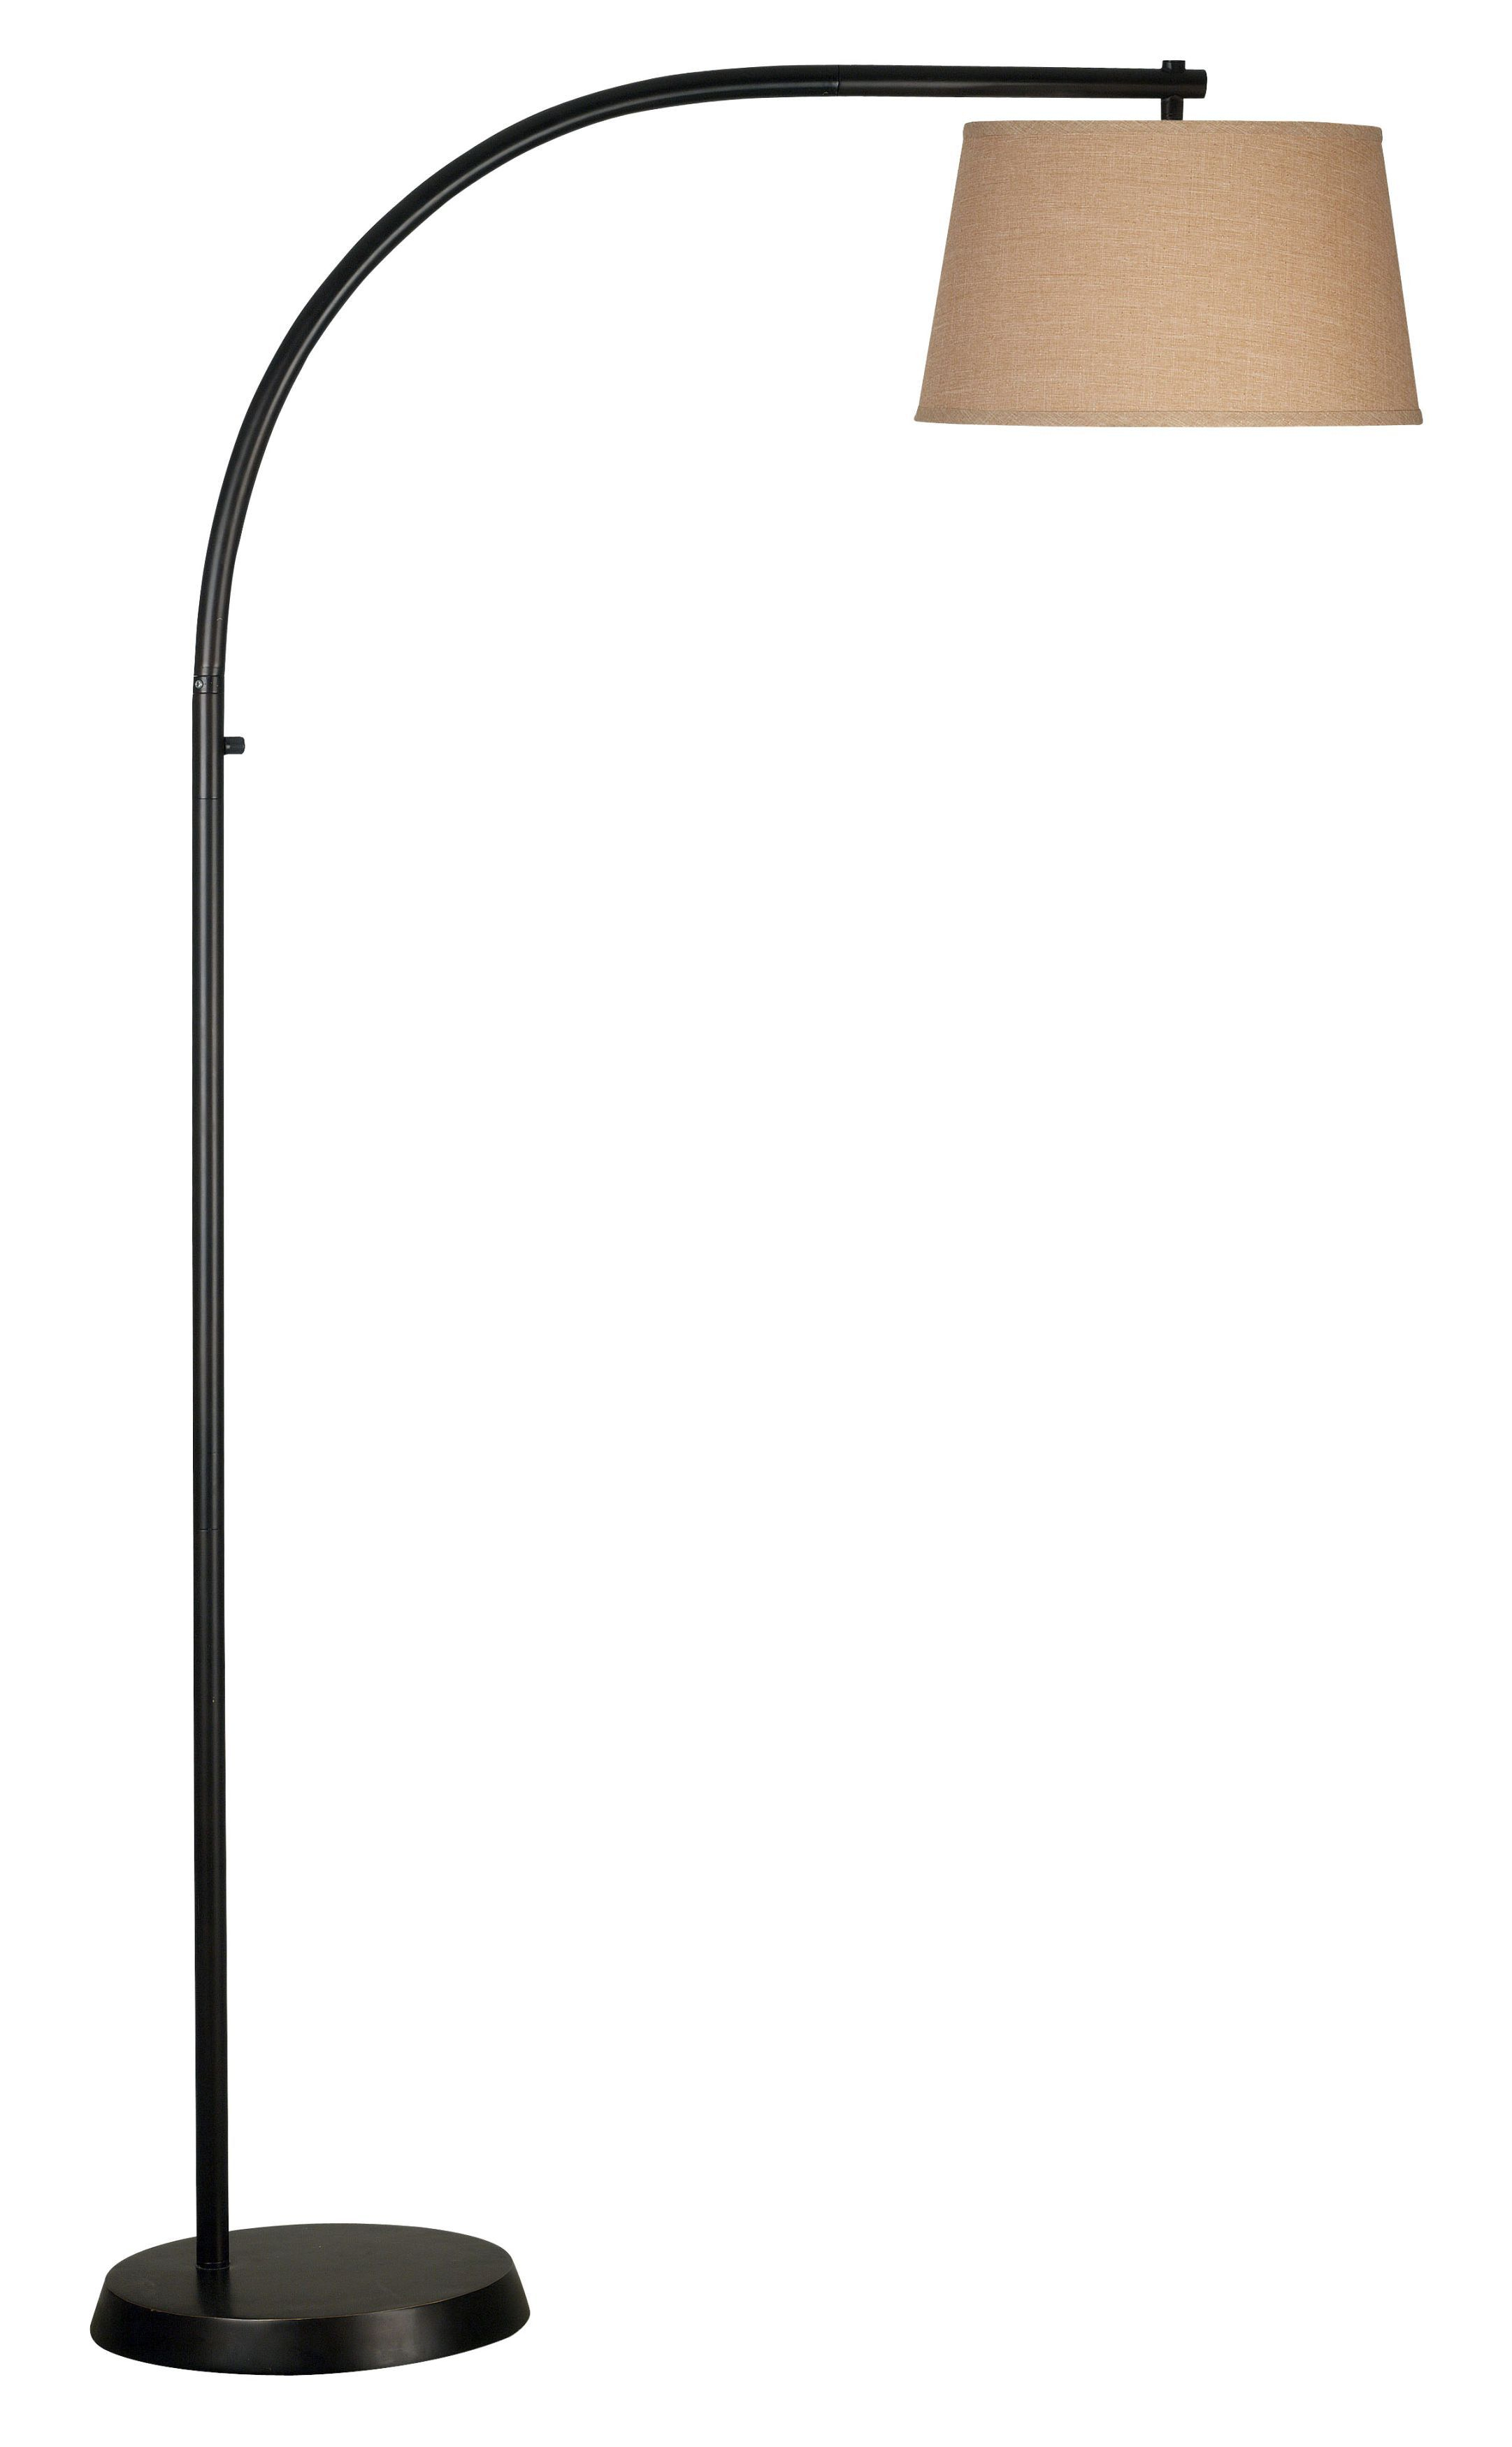 Kenroy Home Sweep Floor Lamp In Oil Rubbed Bronze inside sizing 2163 X 3500